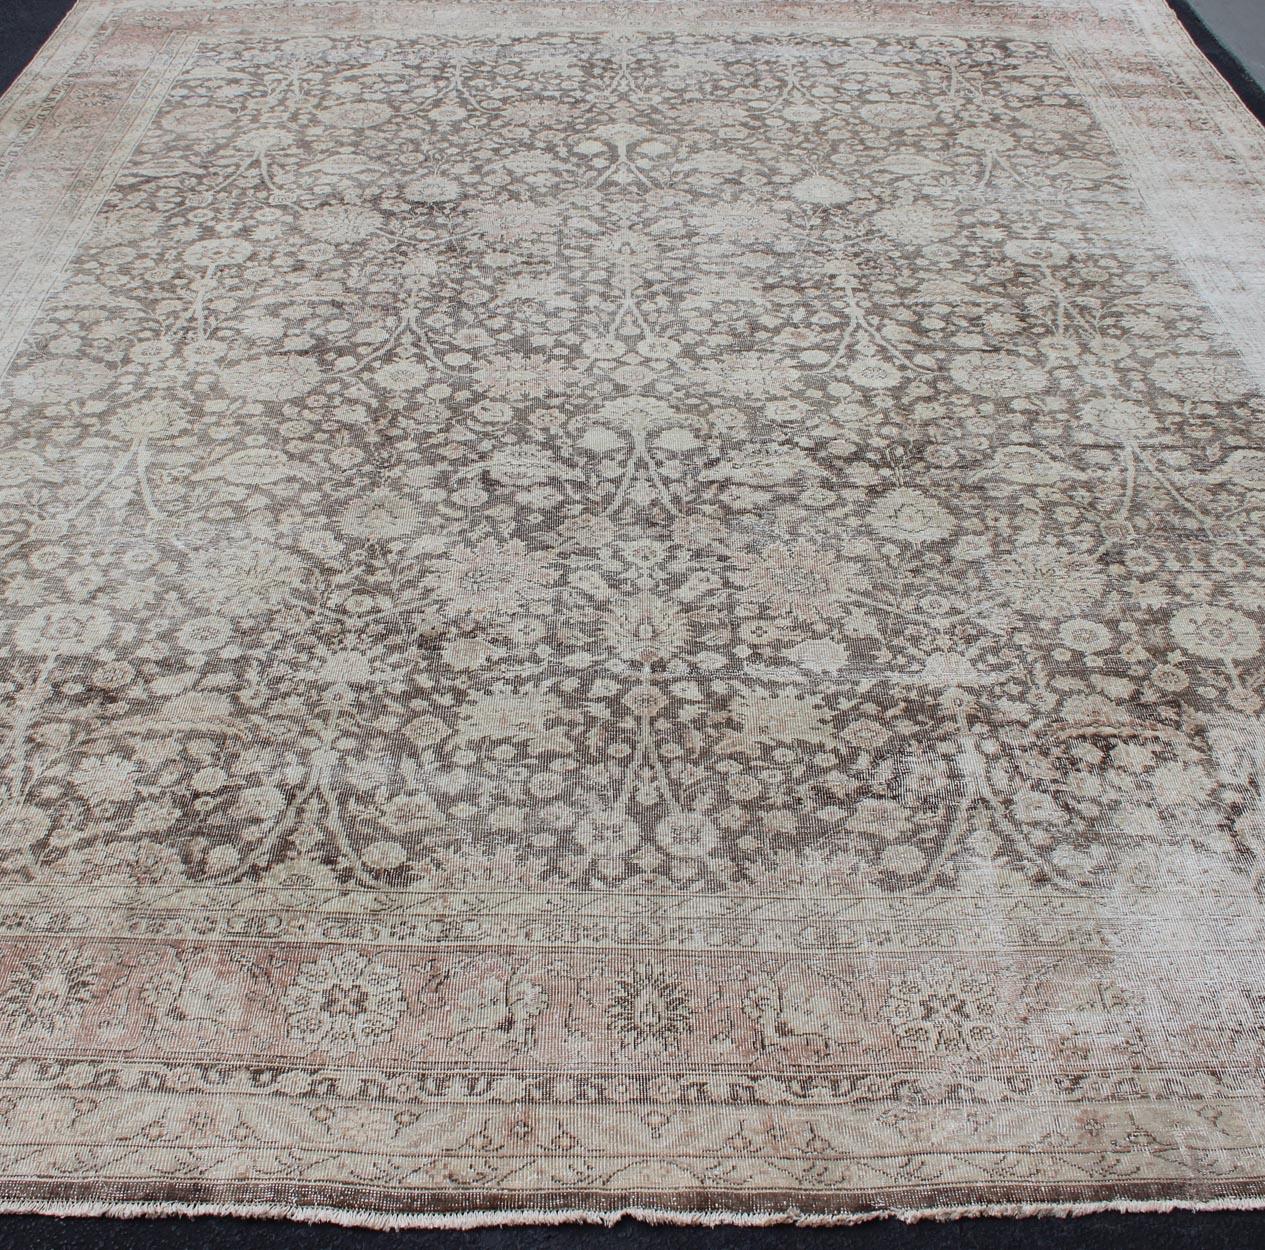 Antique Turkish Oushak Rug with All-Over Floral Design in Earth Tones For Sale 1